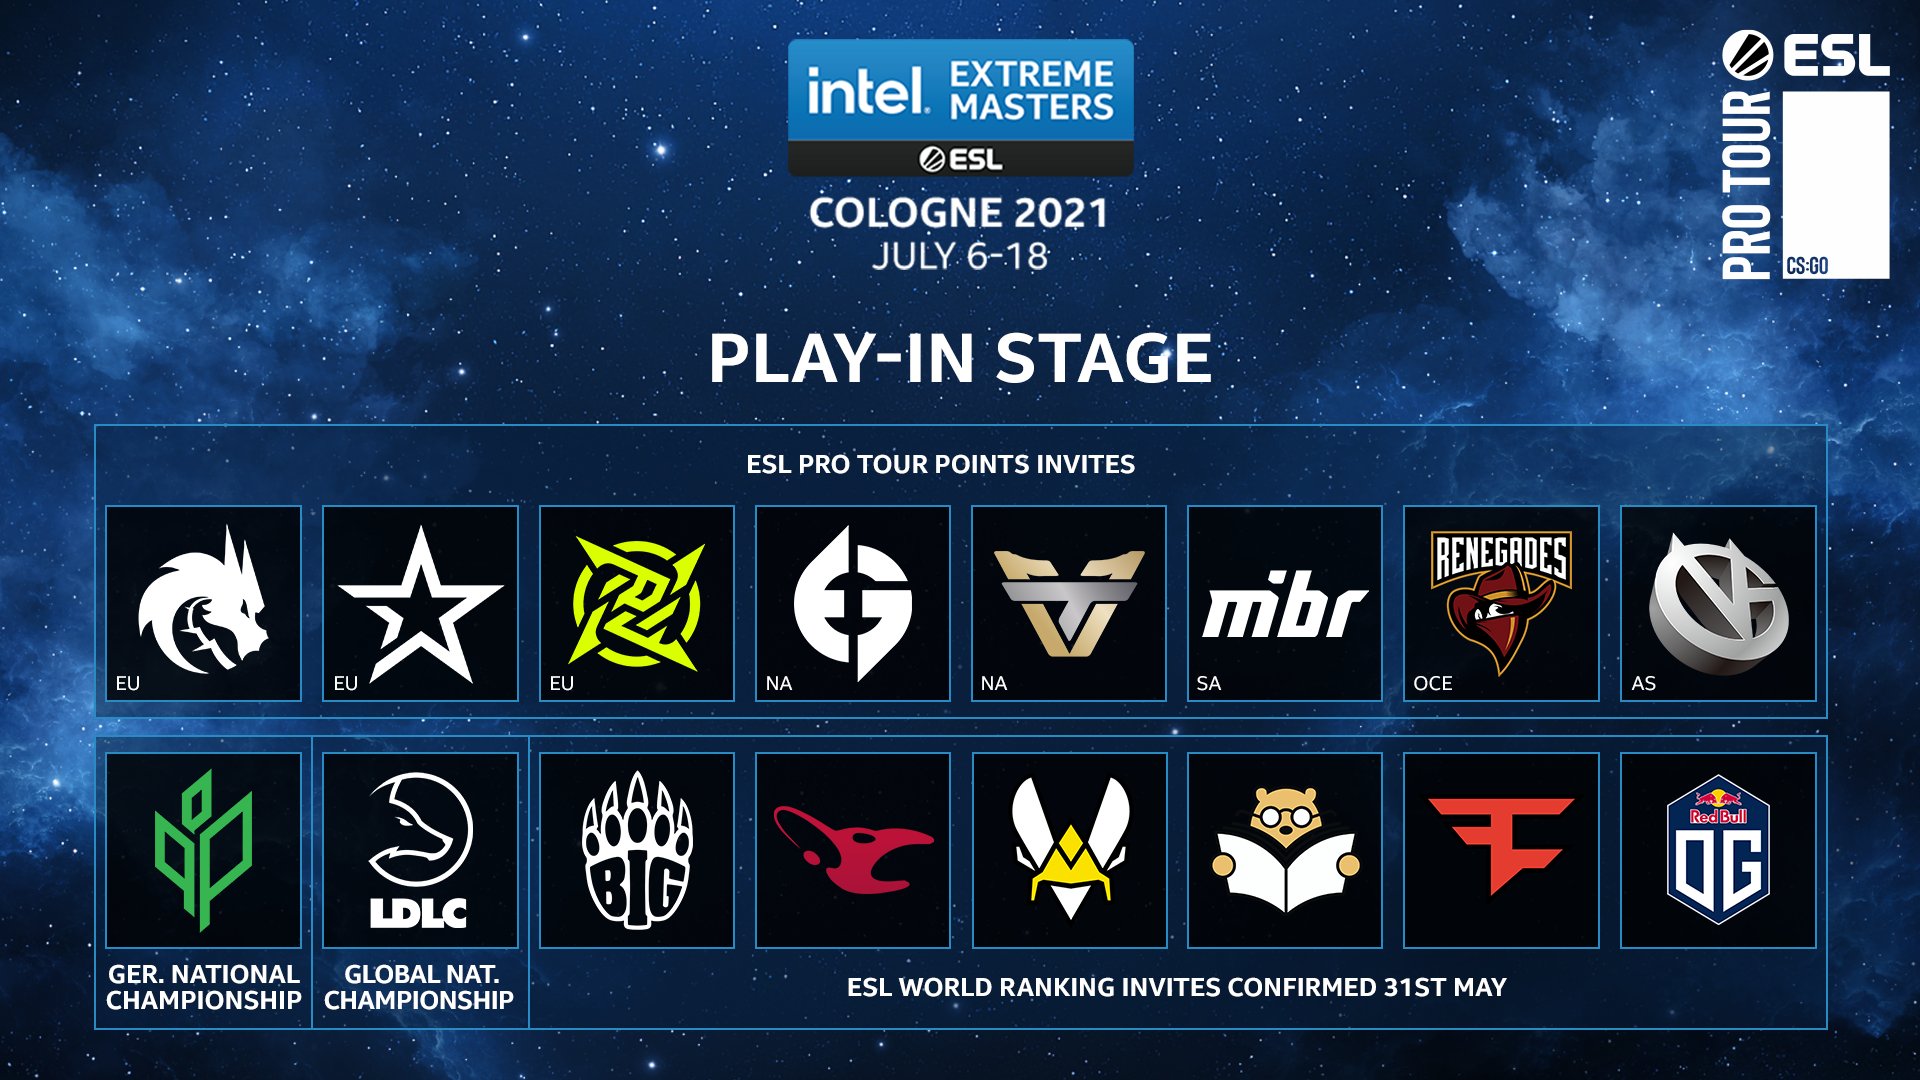 ESL unveils full team list for IEM Cologne playin stage Dot Esports